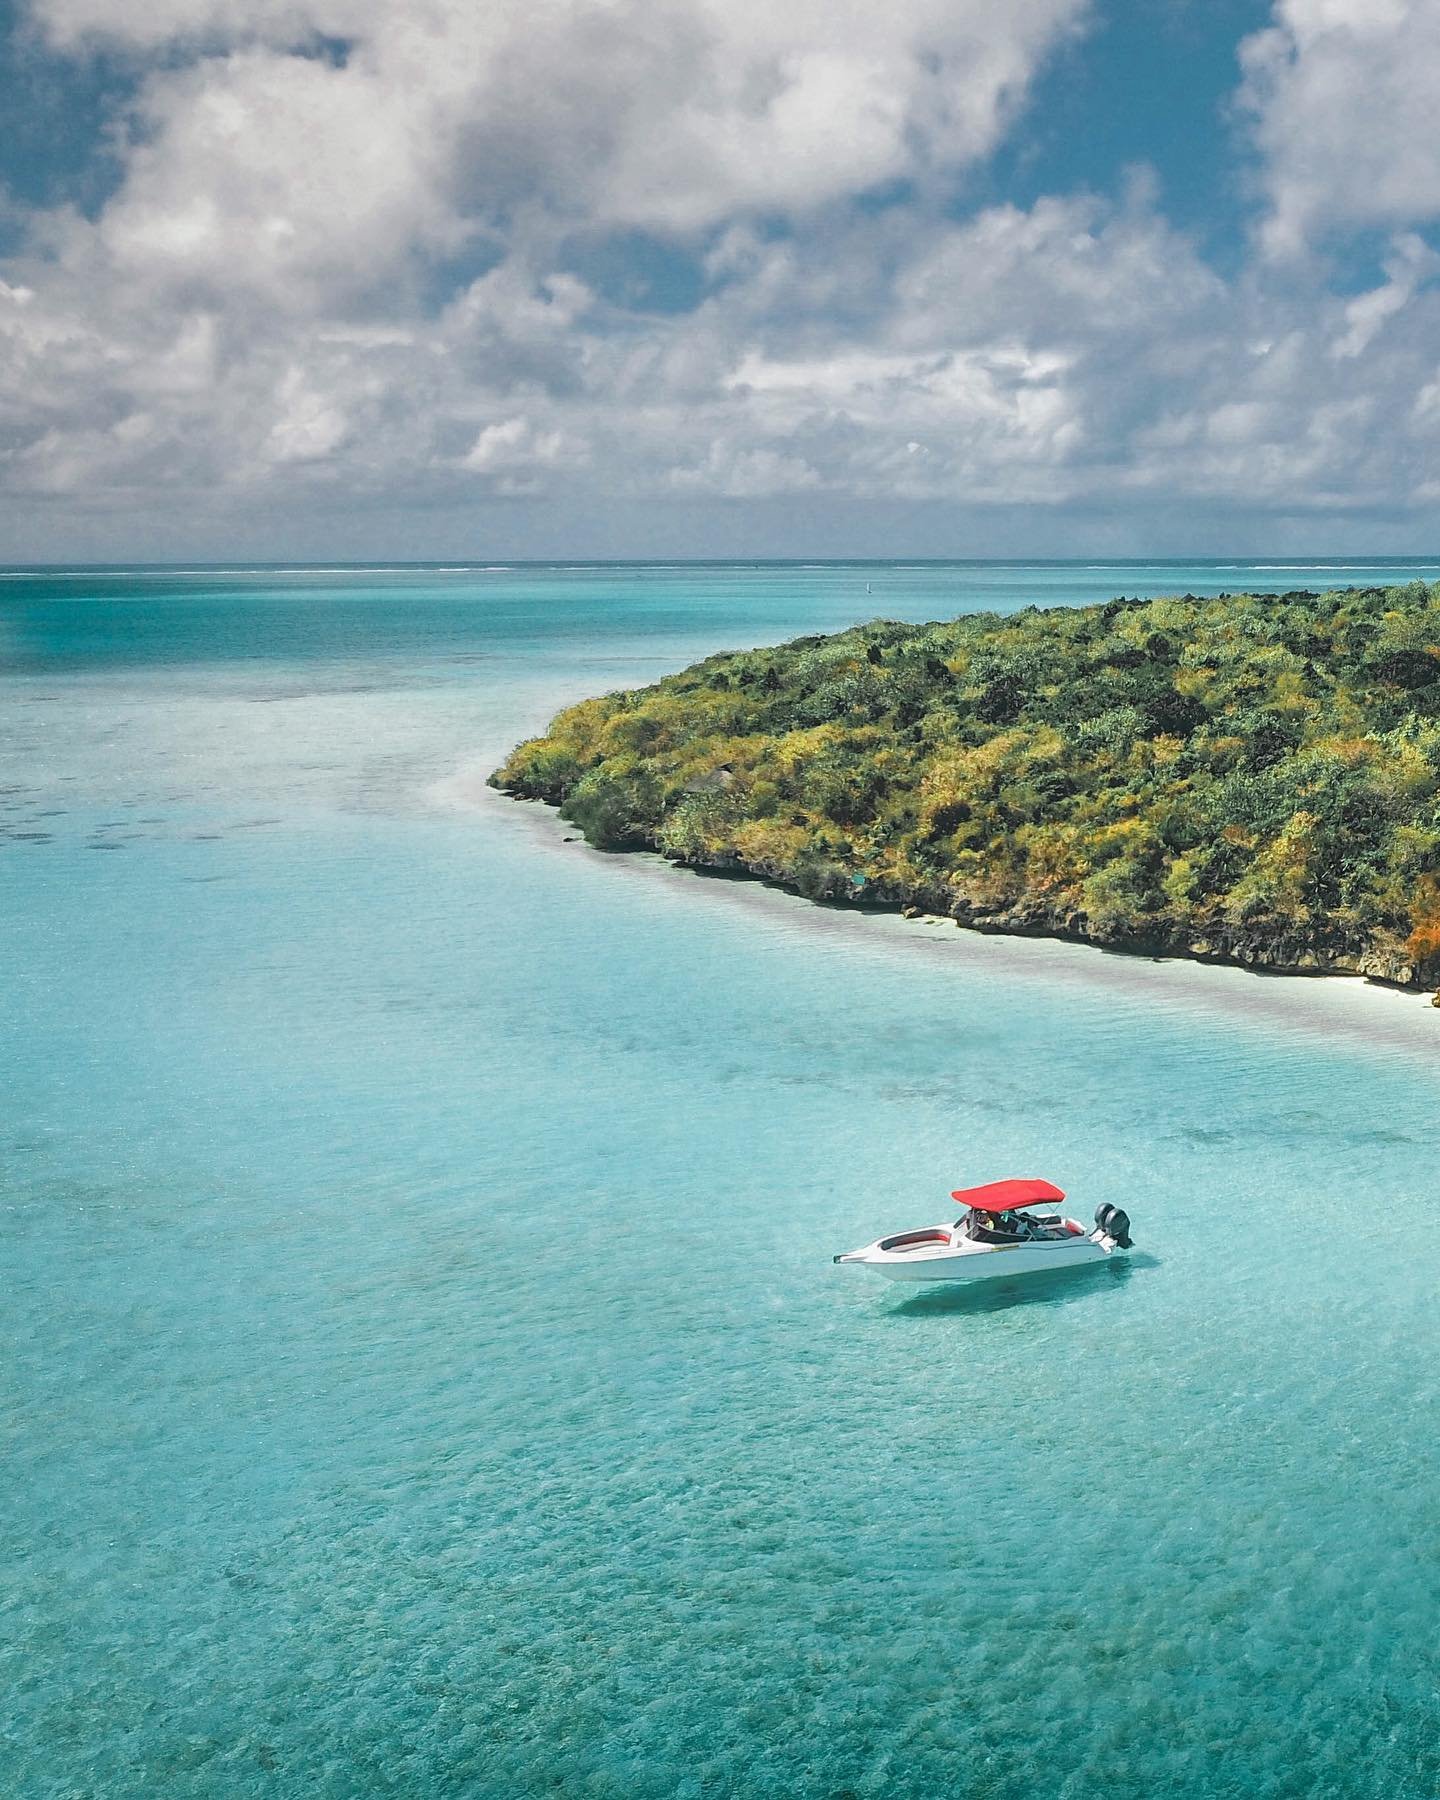 🏝️🍹 Dive into this incredible natural pool! Ile aux Aigrettes never fails to provide wonderful moments for sipping cocktails in the water, swimming in amazing crystal-clear waters, and snorkeling in a secret spot not far away.

It's definitely a mu